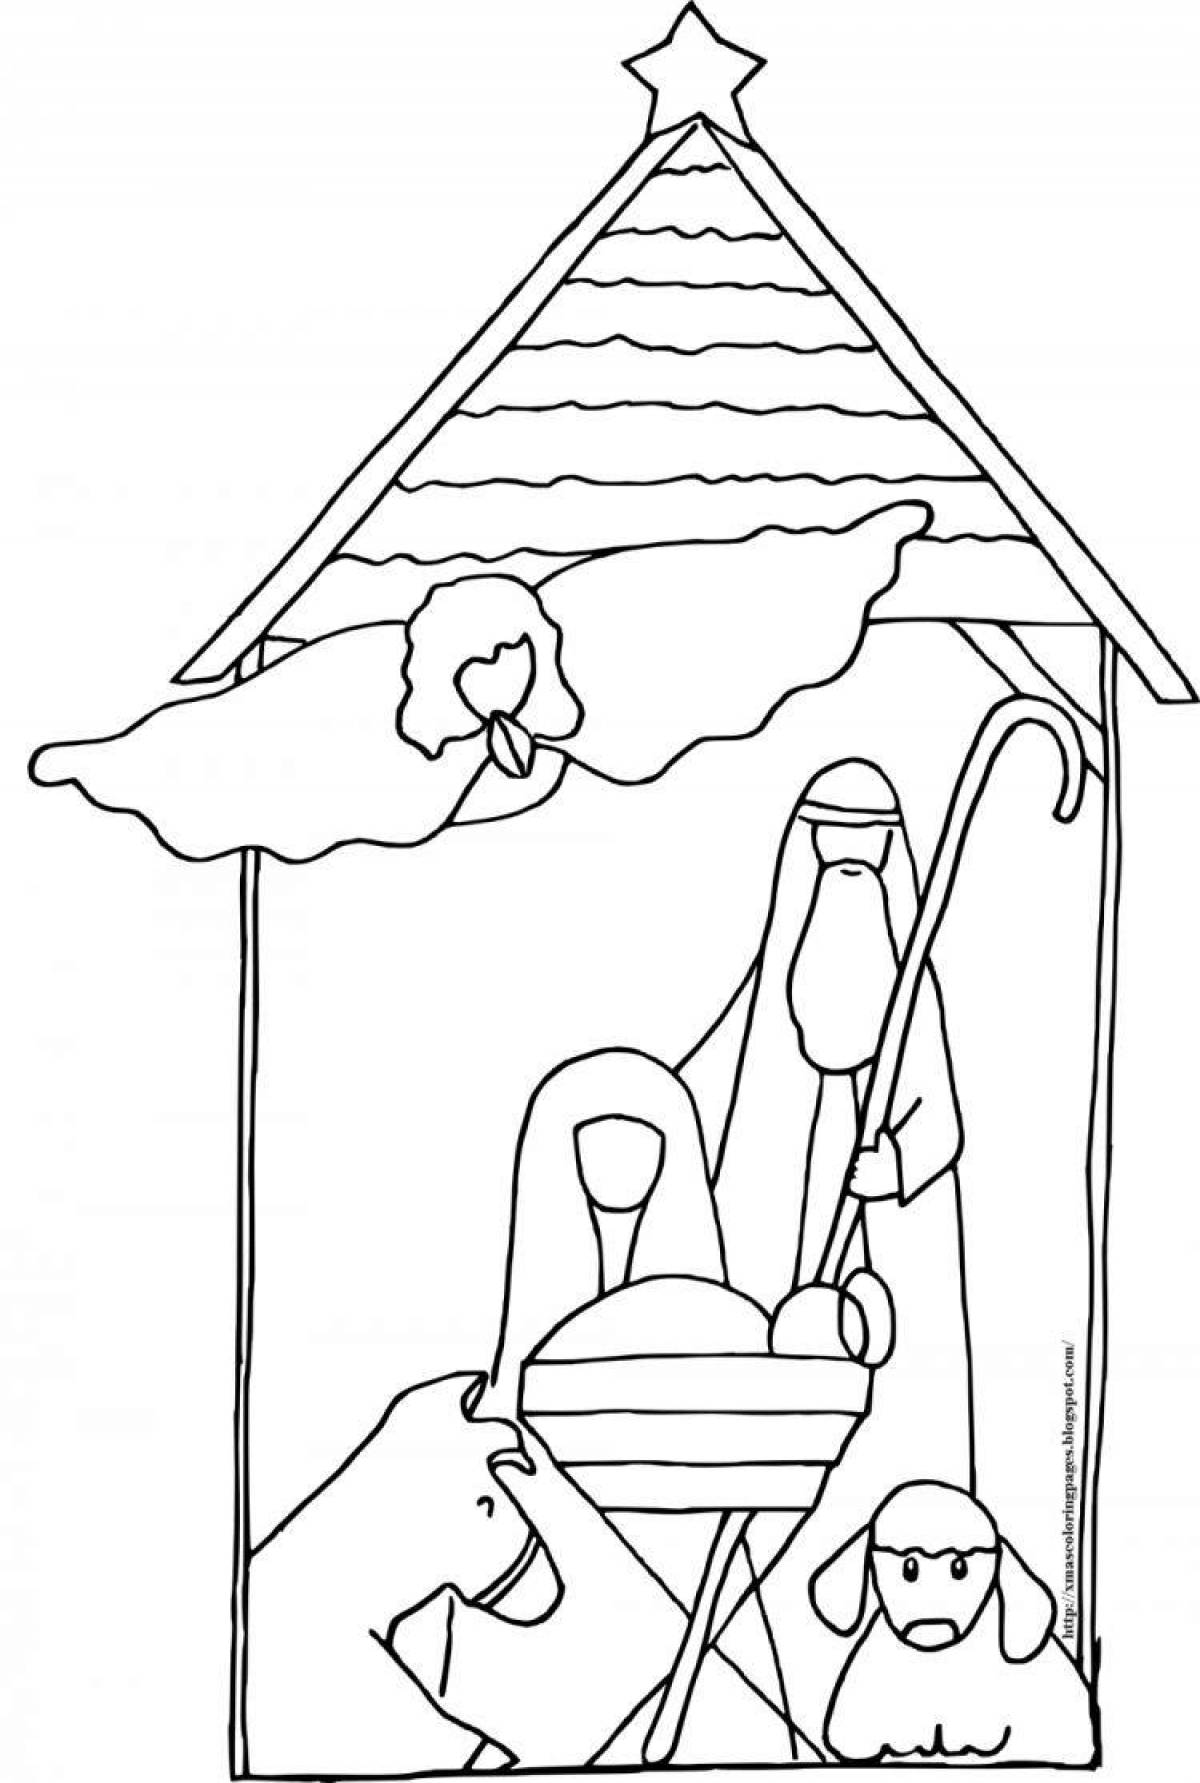 Blessed Christmas Nativity Coloring Page